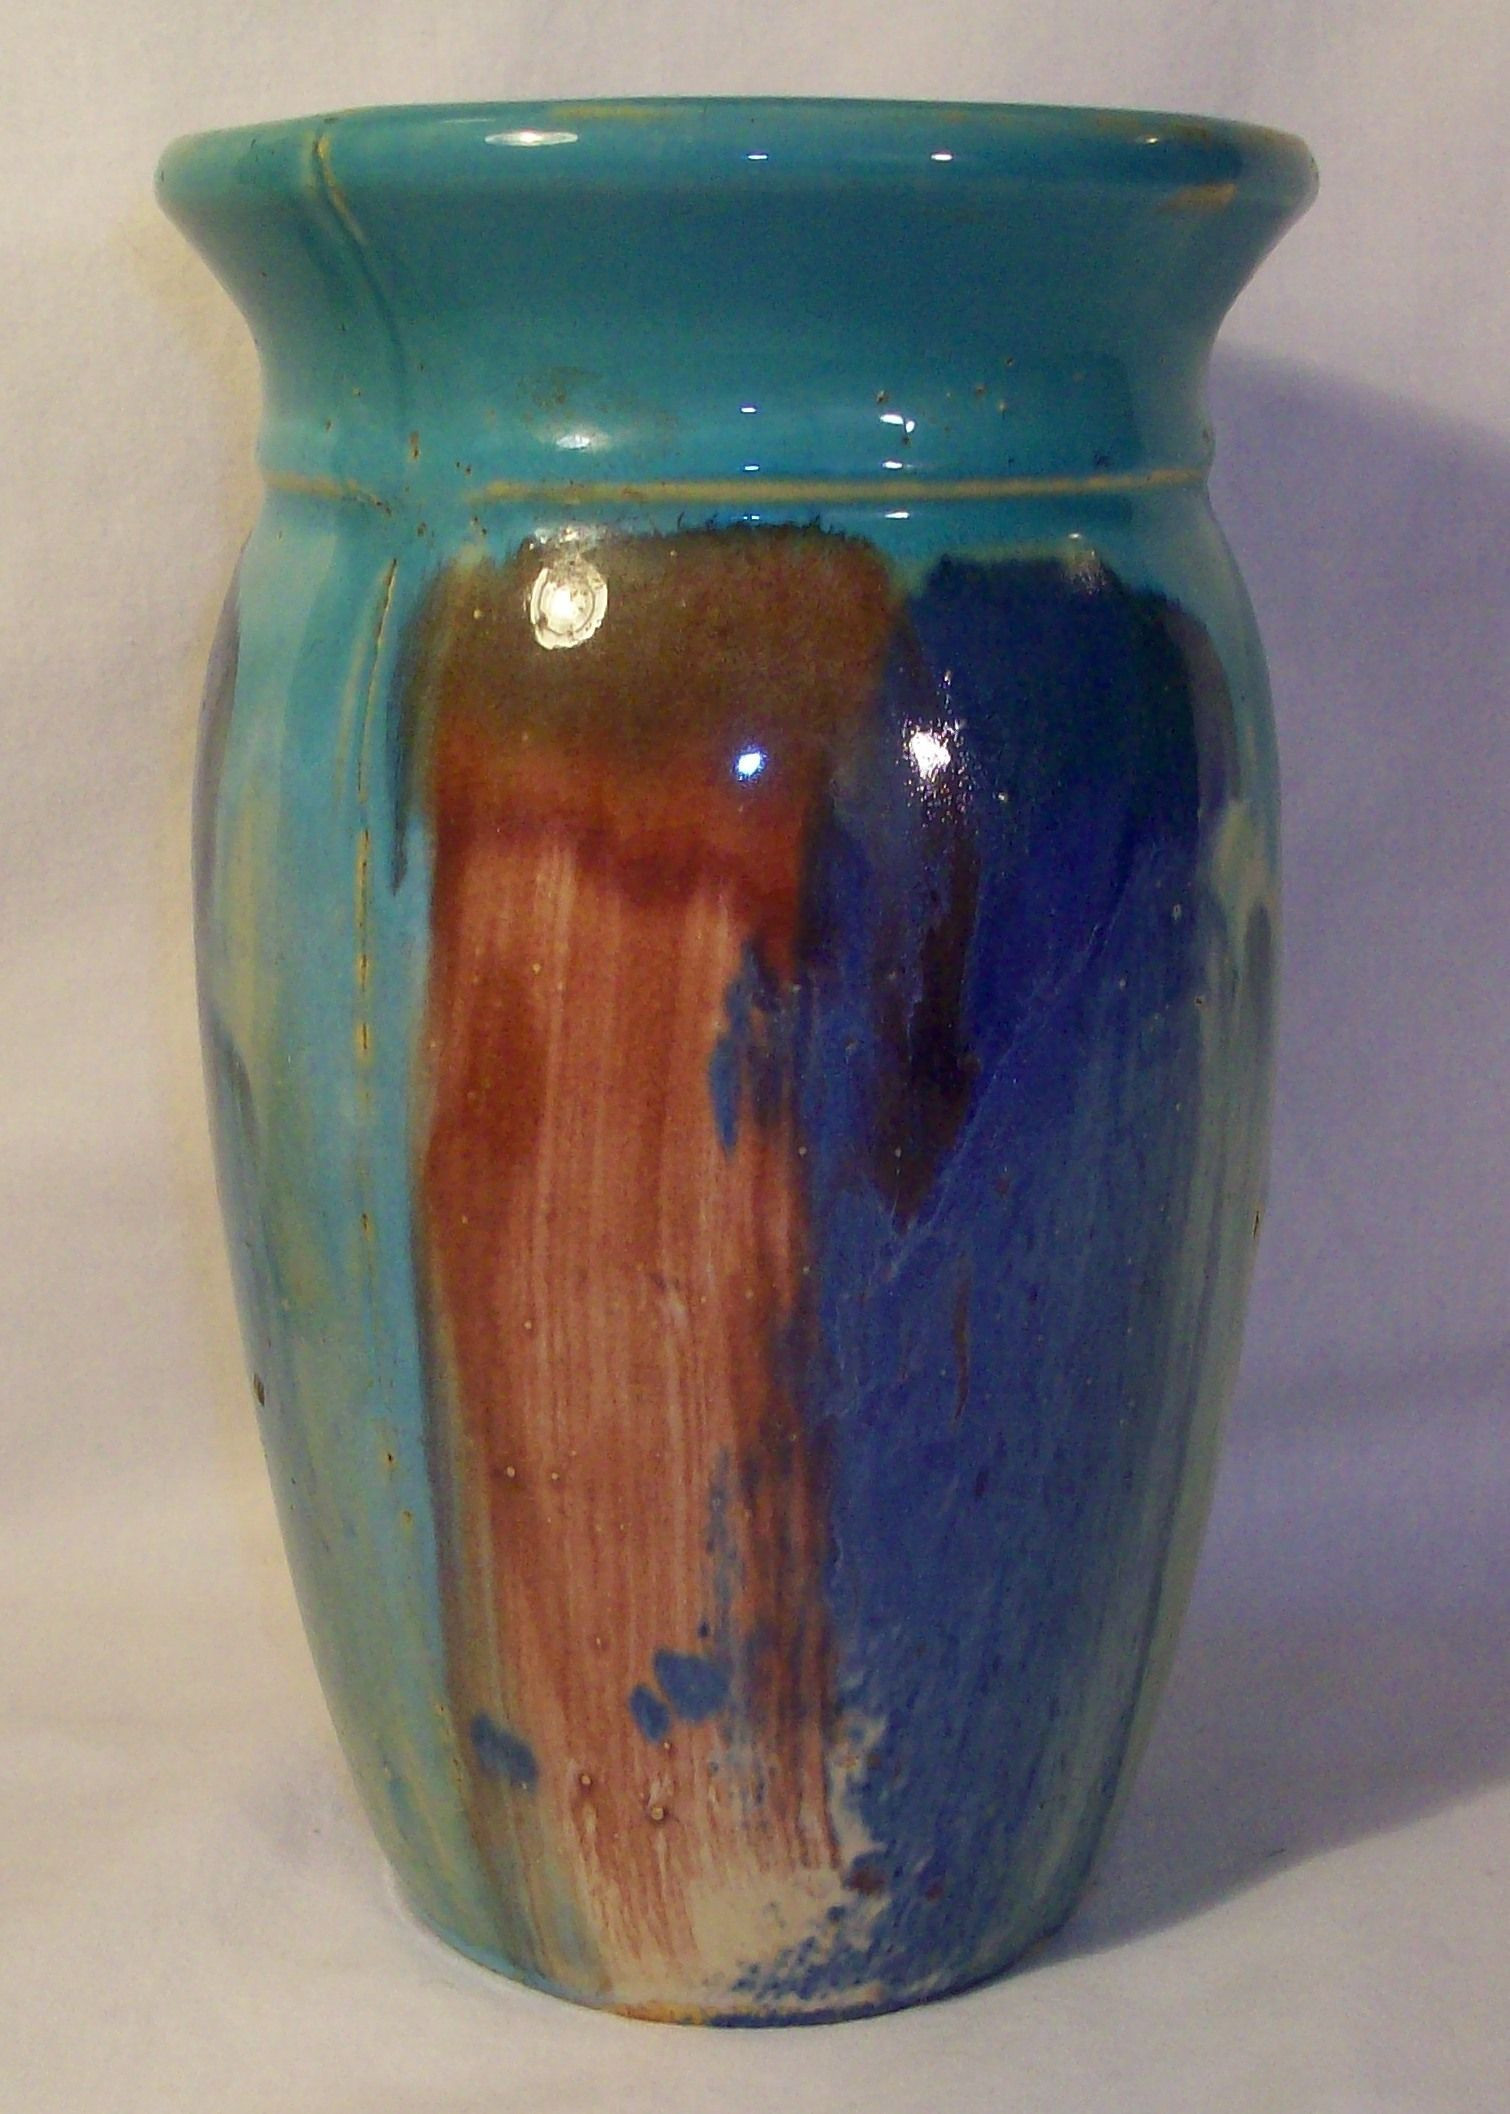 27 Stunning Niloak Pottery Vase 2024 free download niloak pottery vase of pics of large pottery vases vases artificial plants collection inside large pottery vases photos 1920 s hull pottery early art vase of pics of large pottery